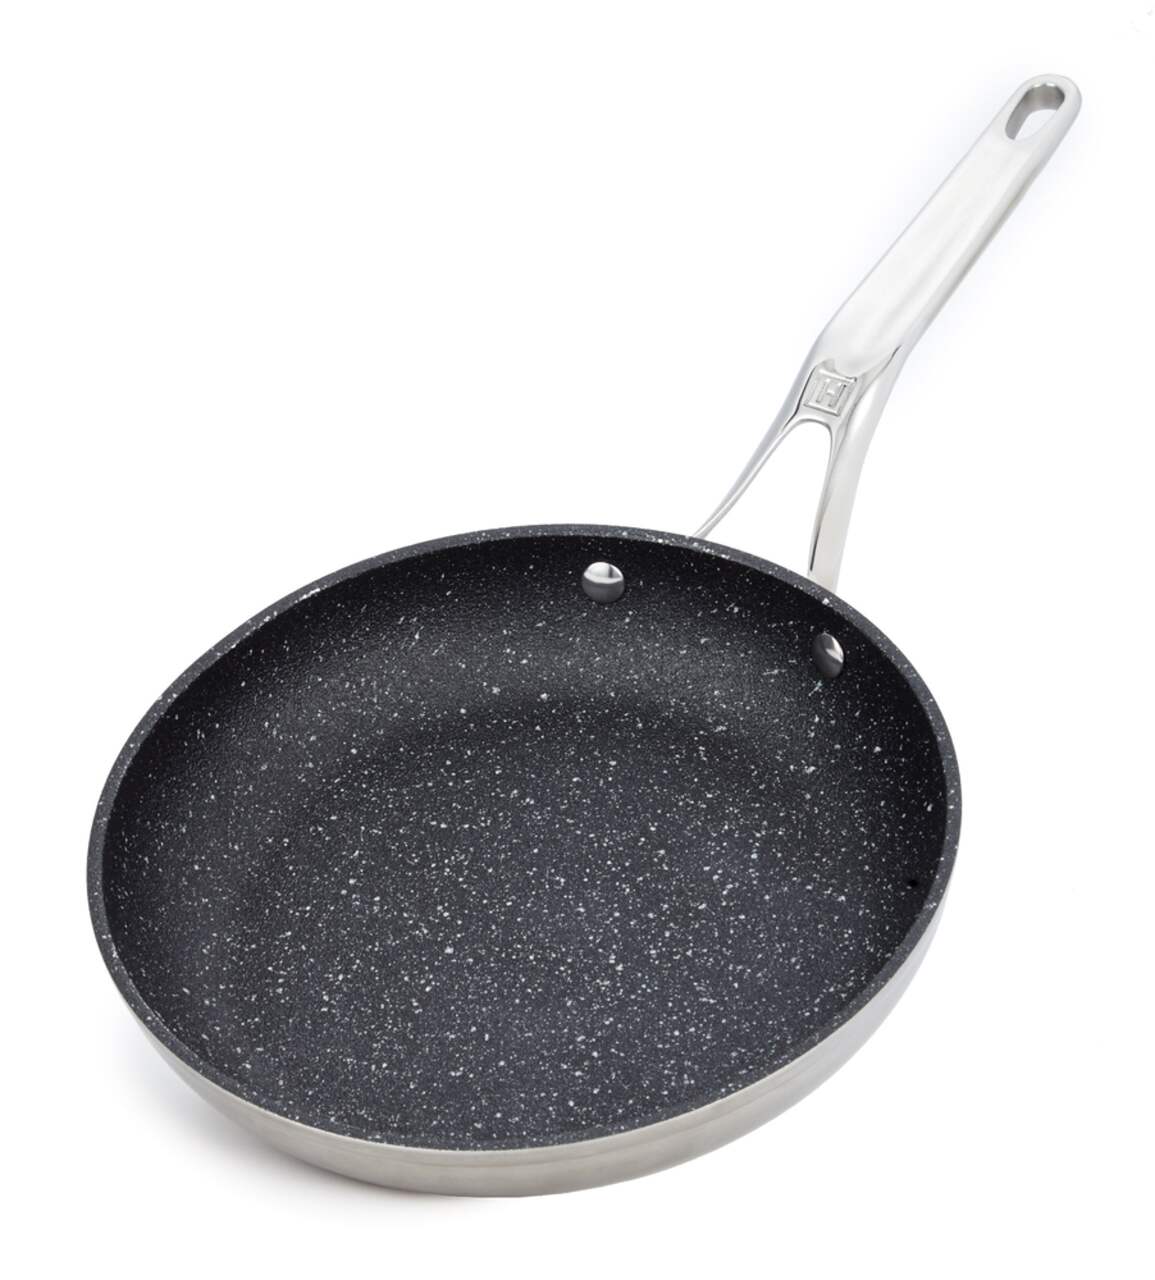 https://media-www.canadiantire.ca/product/living/kitchen/cookware/1428821/heritage-the-rock-22cm-bi-clad-frypan-bfc70606-a230-4d3a-9ab9-2ab24877a5ac.png?imdensity=1&imwidth=640&impolicy=mZoom